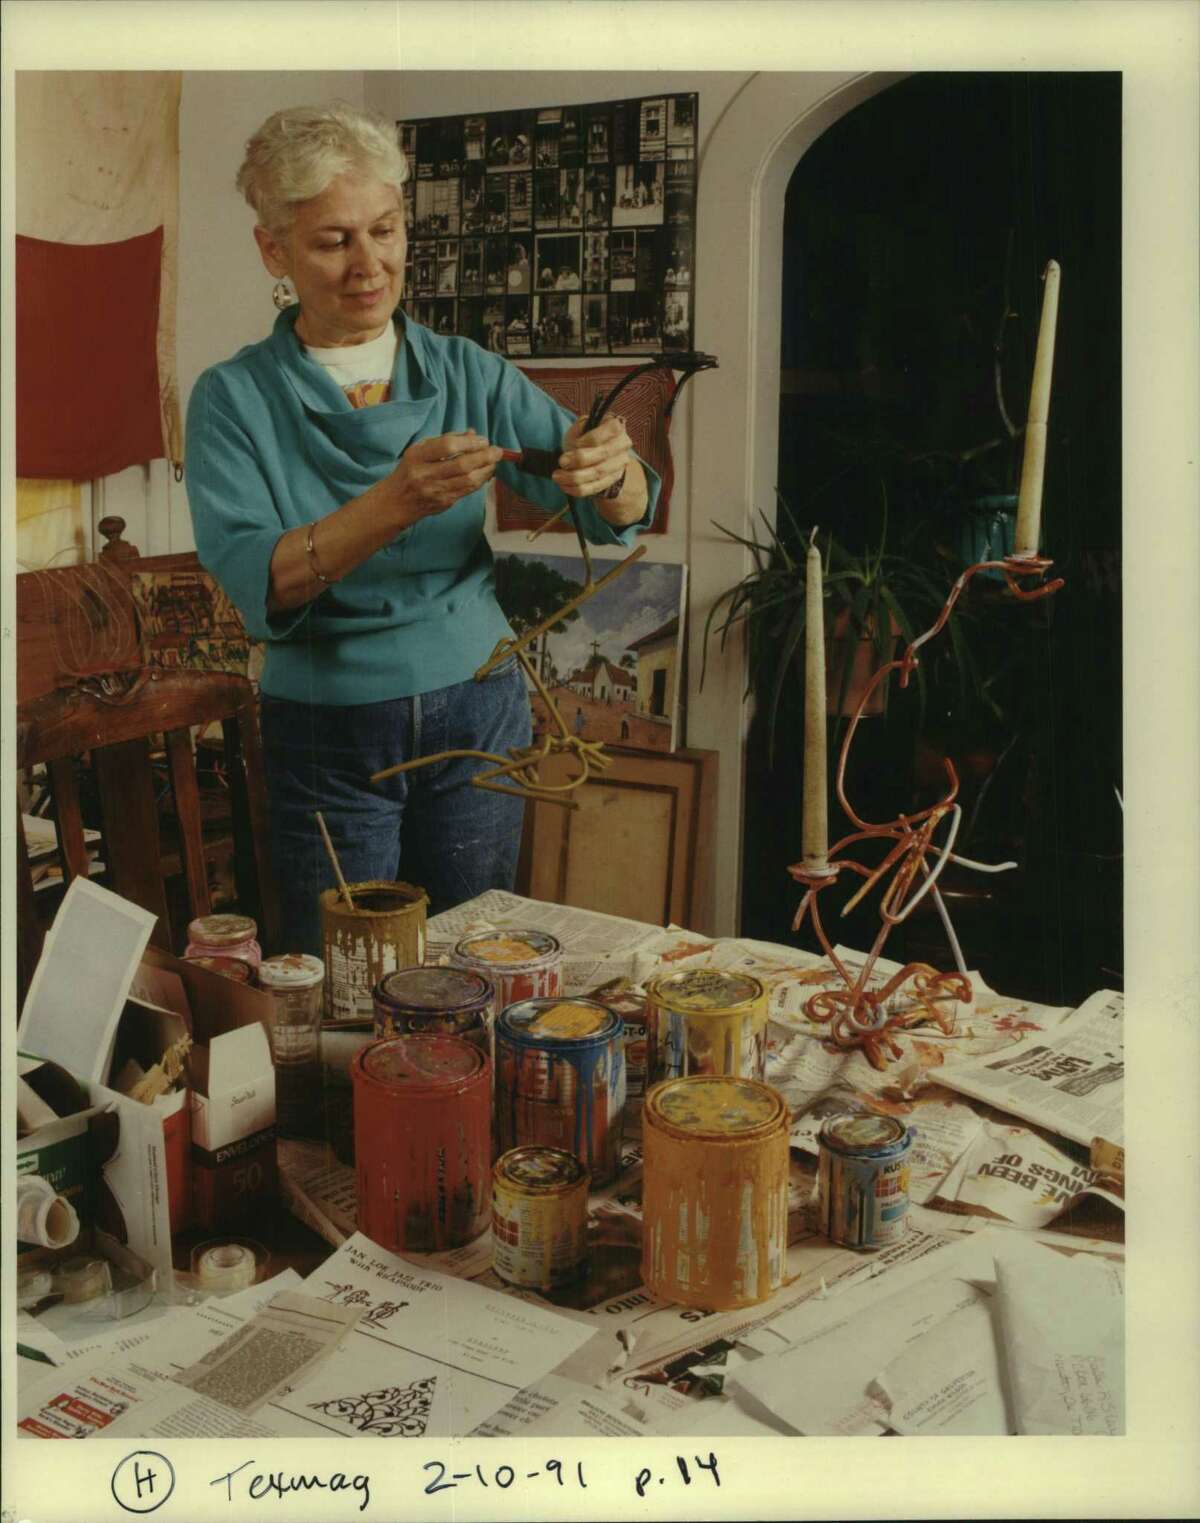 In this 1991 file photo, Gertrude Barnstone works on a metal sculpture. Barnstone, a renowned Houston artist and champion of civil rights causes, died Monday at the age of 94.